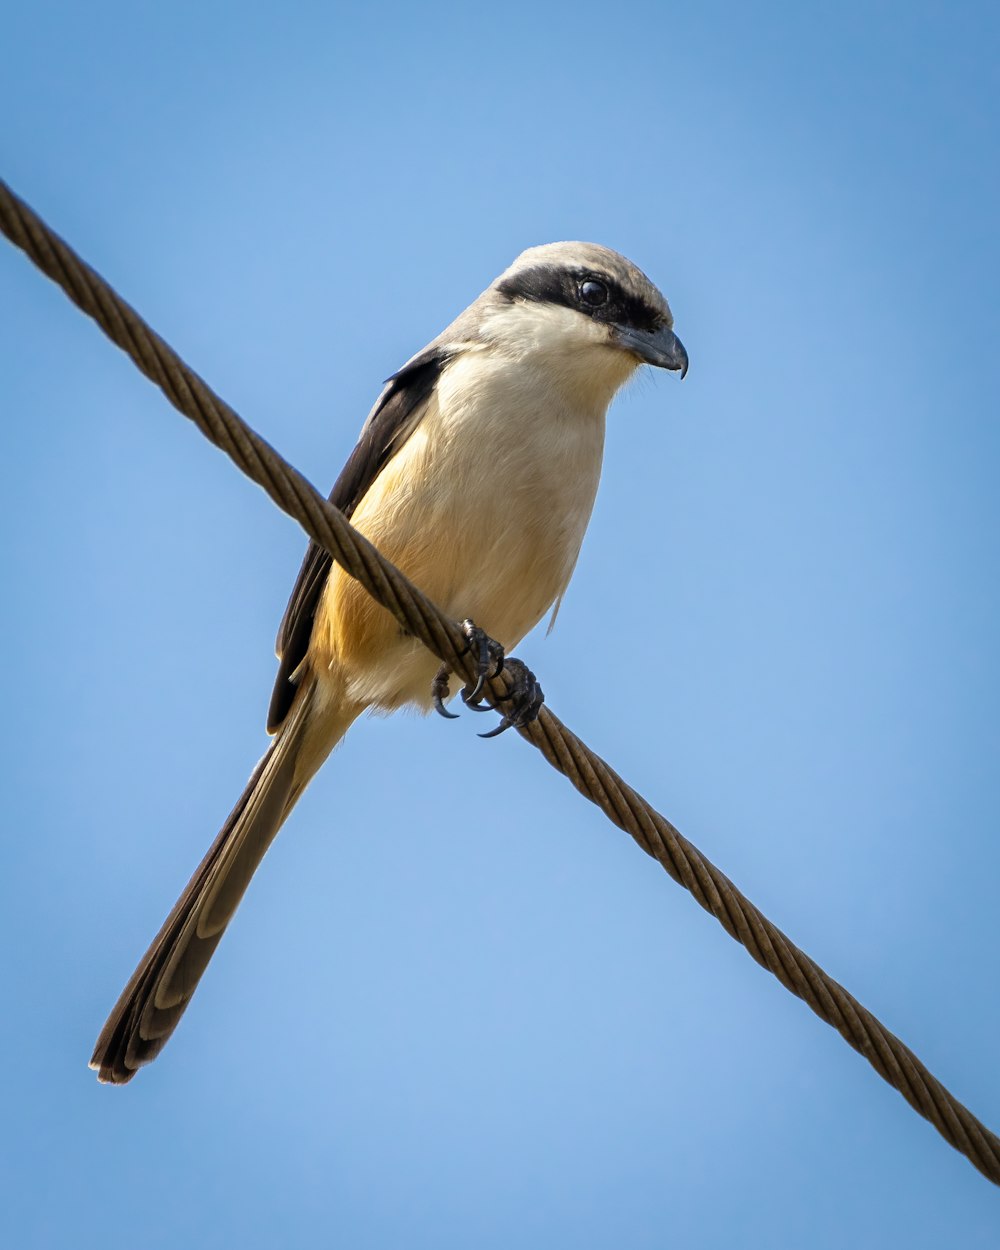 brown and white bird on brown wooden stick during daytime